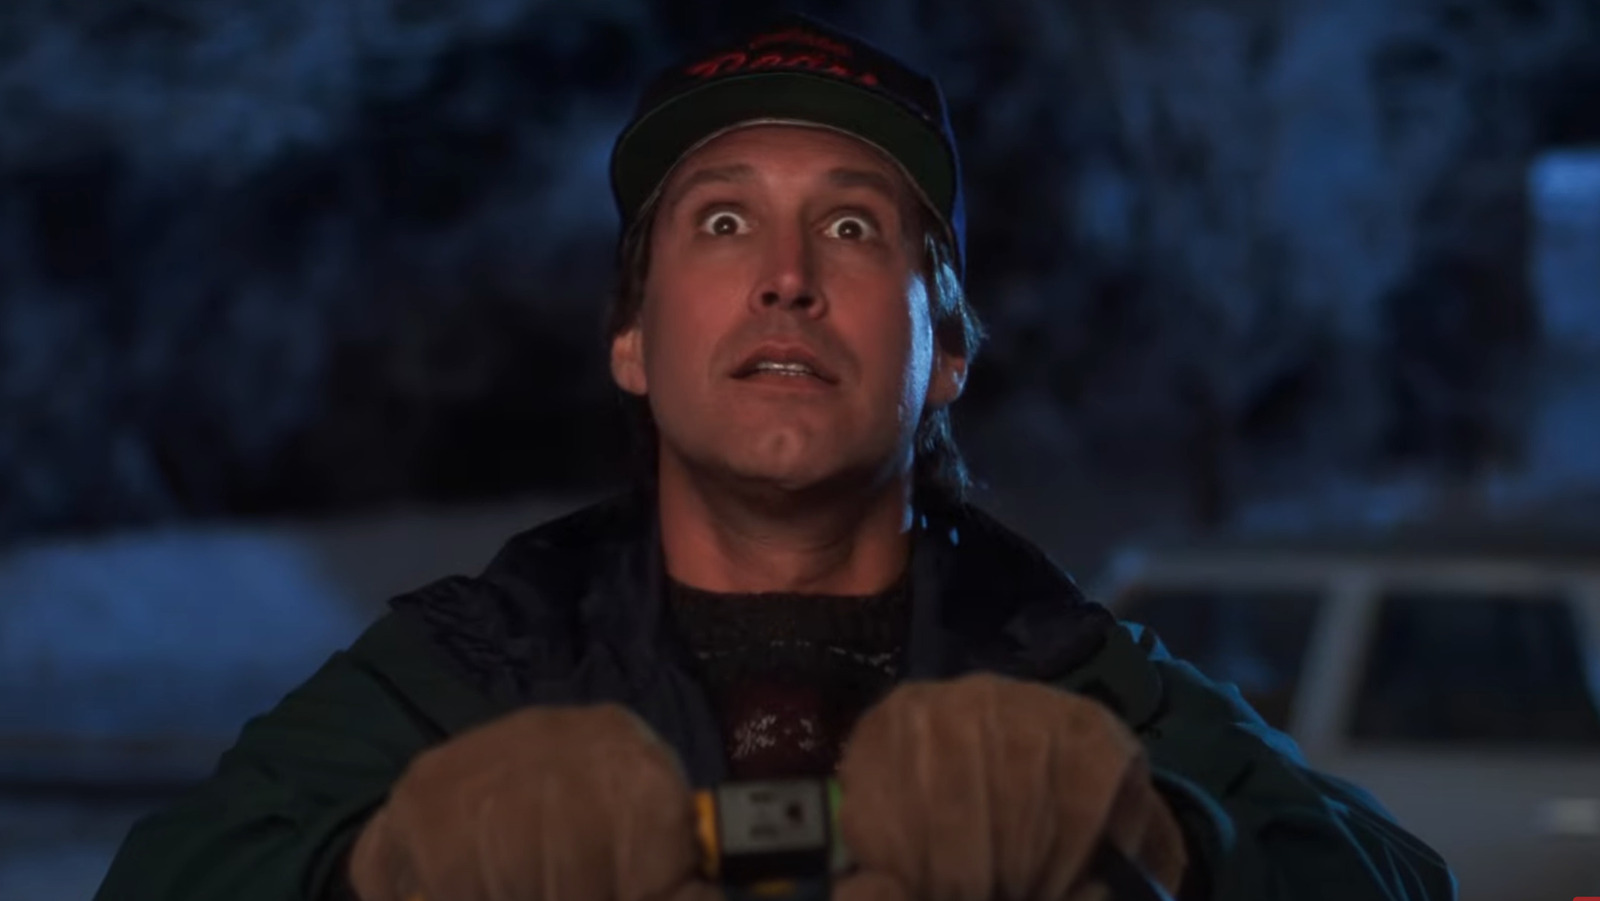 Here's Where You Can Watch National Lampoon's Christmas Vacation